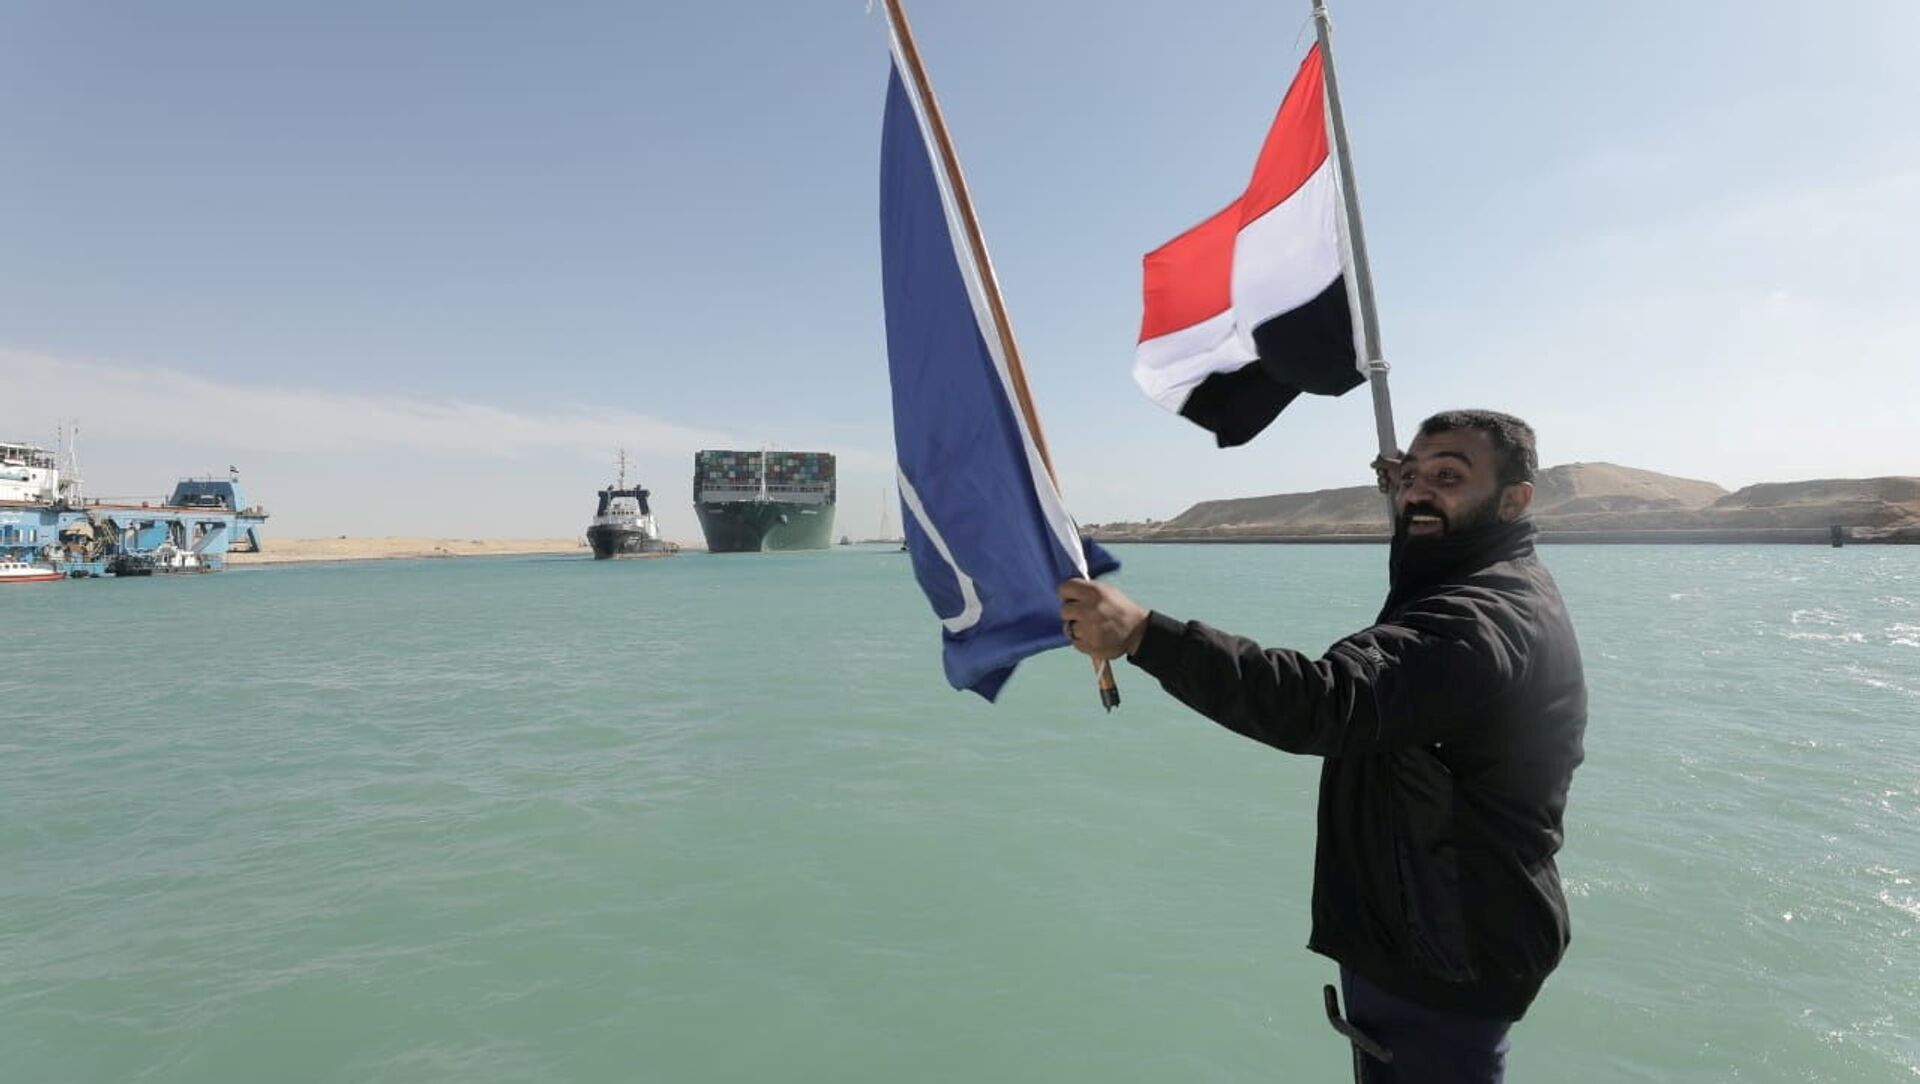 A man waves an Egyptian flag as the Ever Given, one of the world's largest container ships, is seen after it was fully floated in the Suez Canal, Egypt 29 March 2021. - Sputnik International, 1920, 30.03.2021